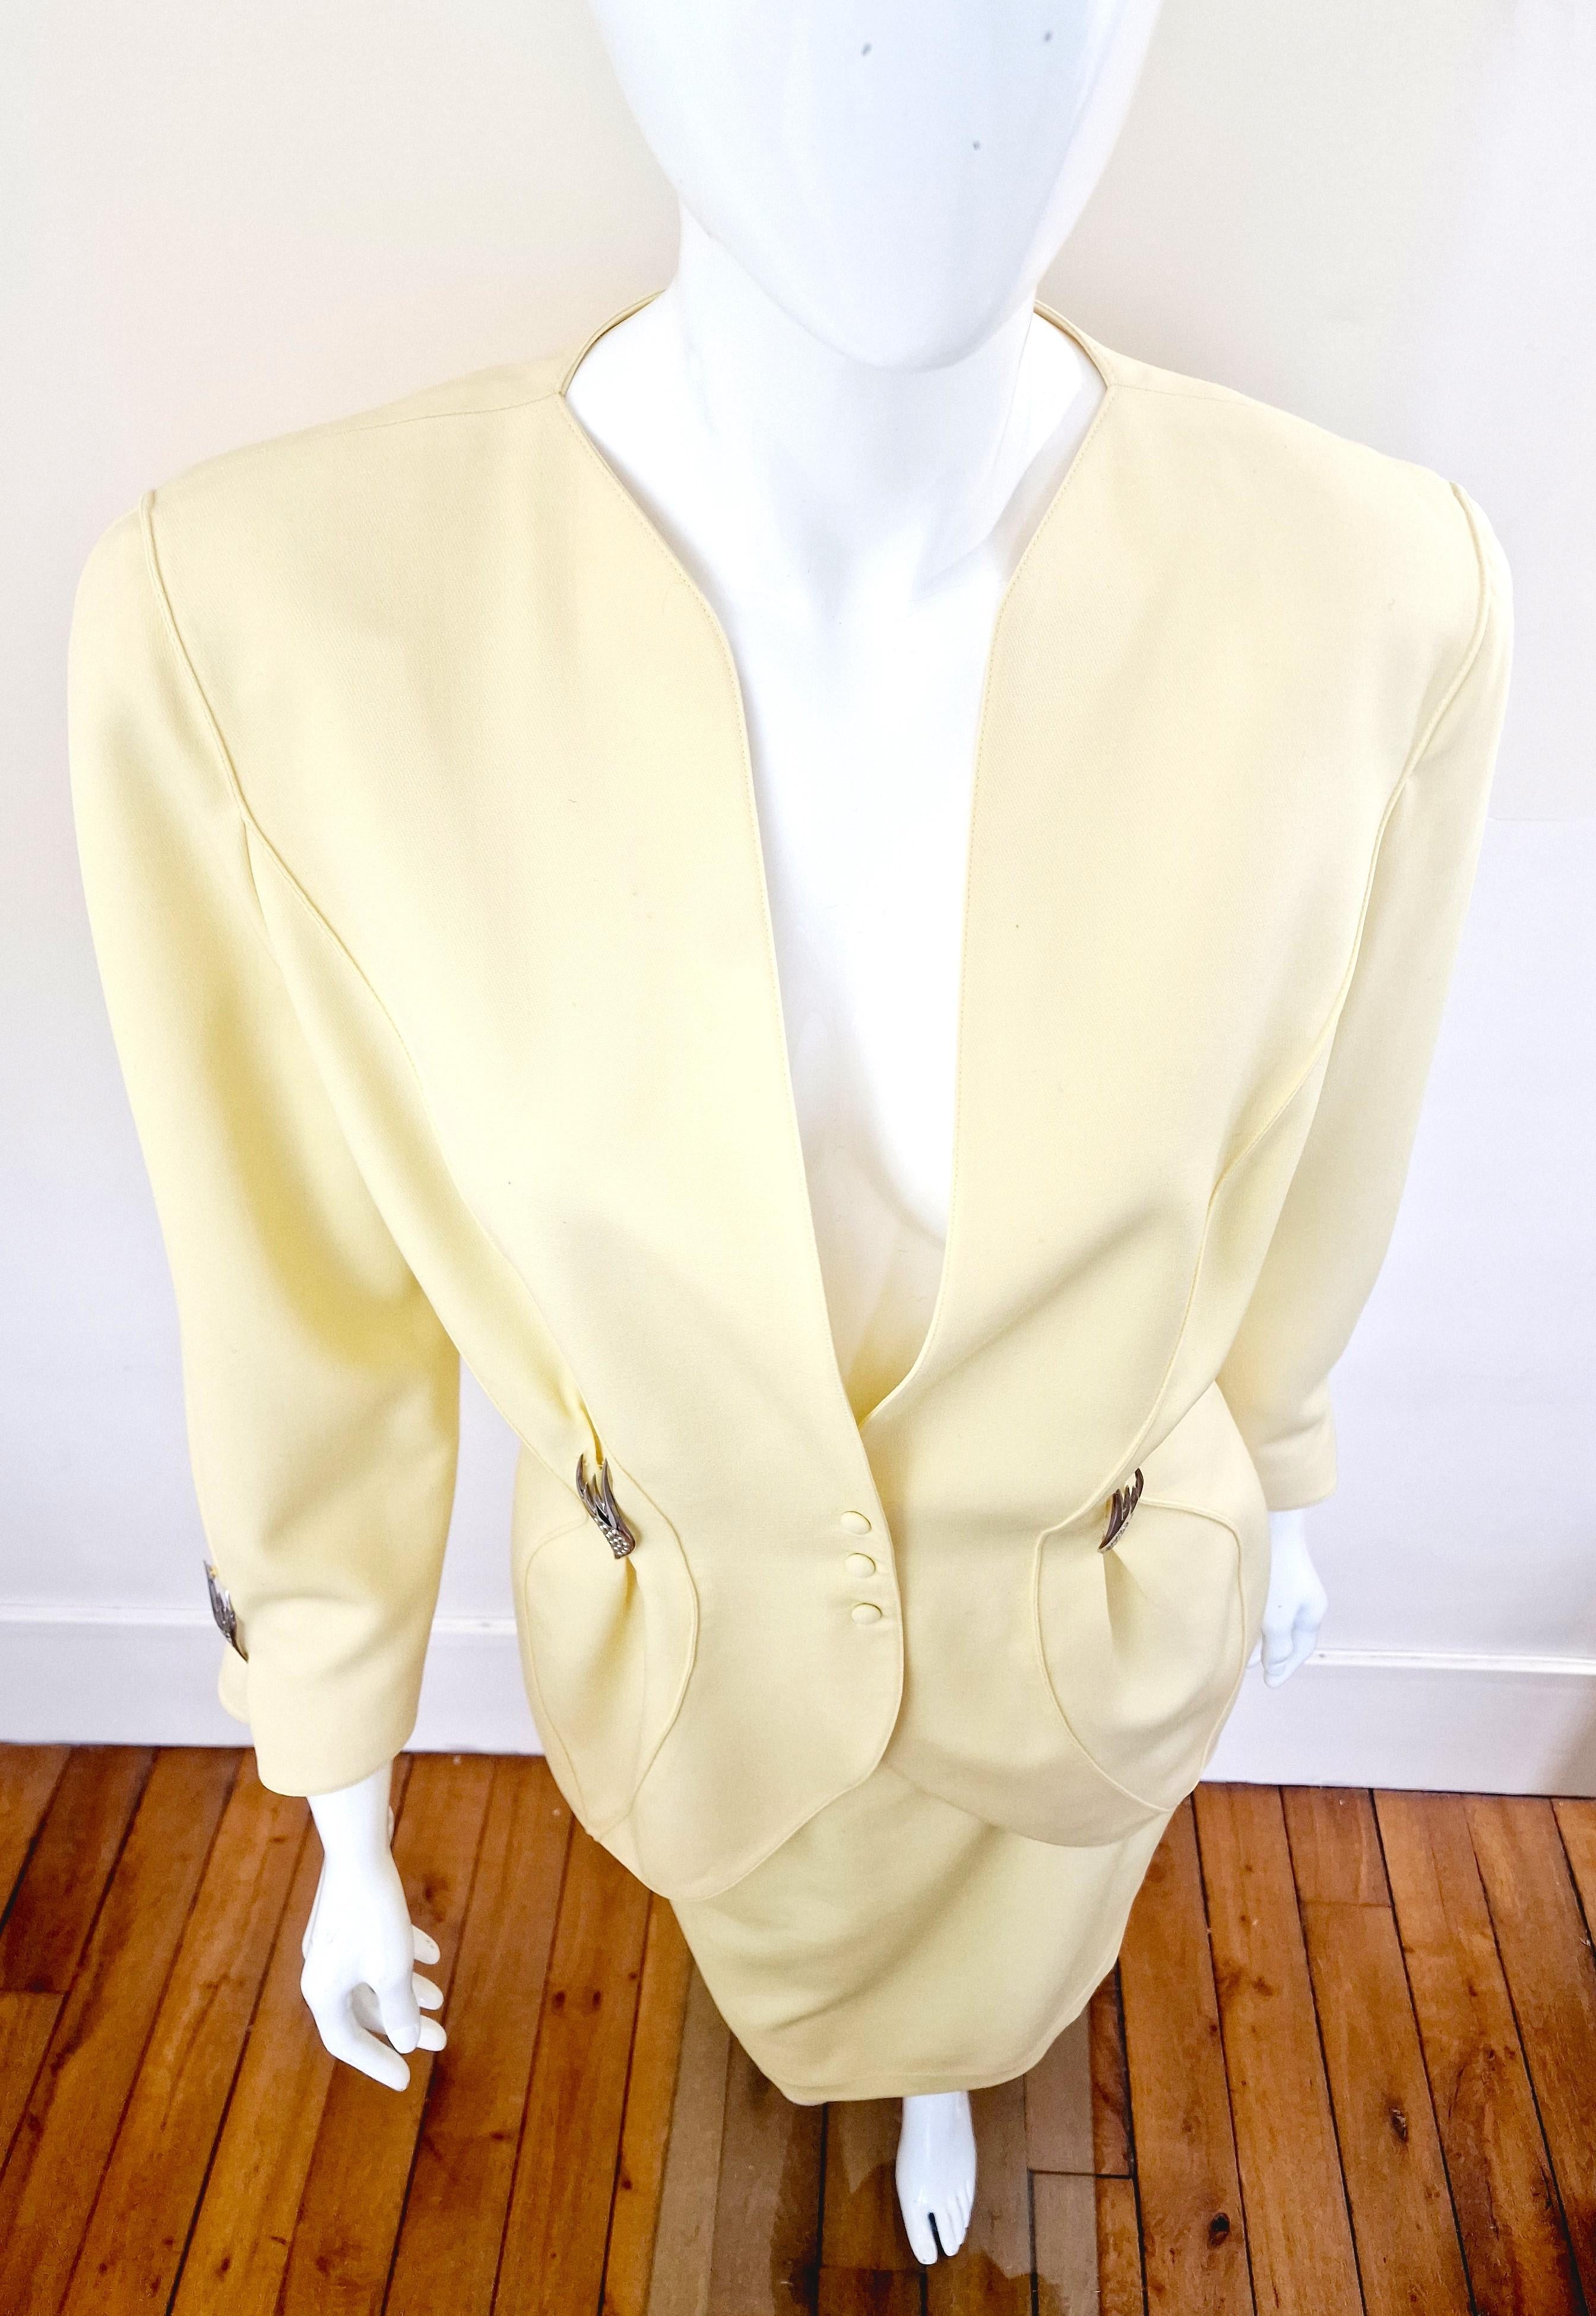  Thierry Mugler Yellow Metal Shiny Star Large Evening Vampir Couture Dress Suit  For Sale 3